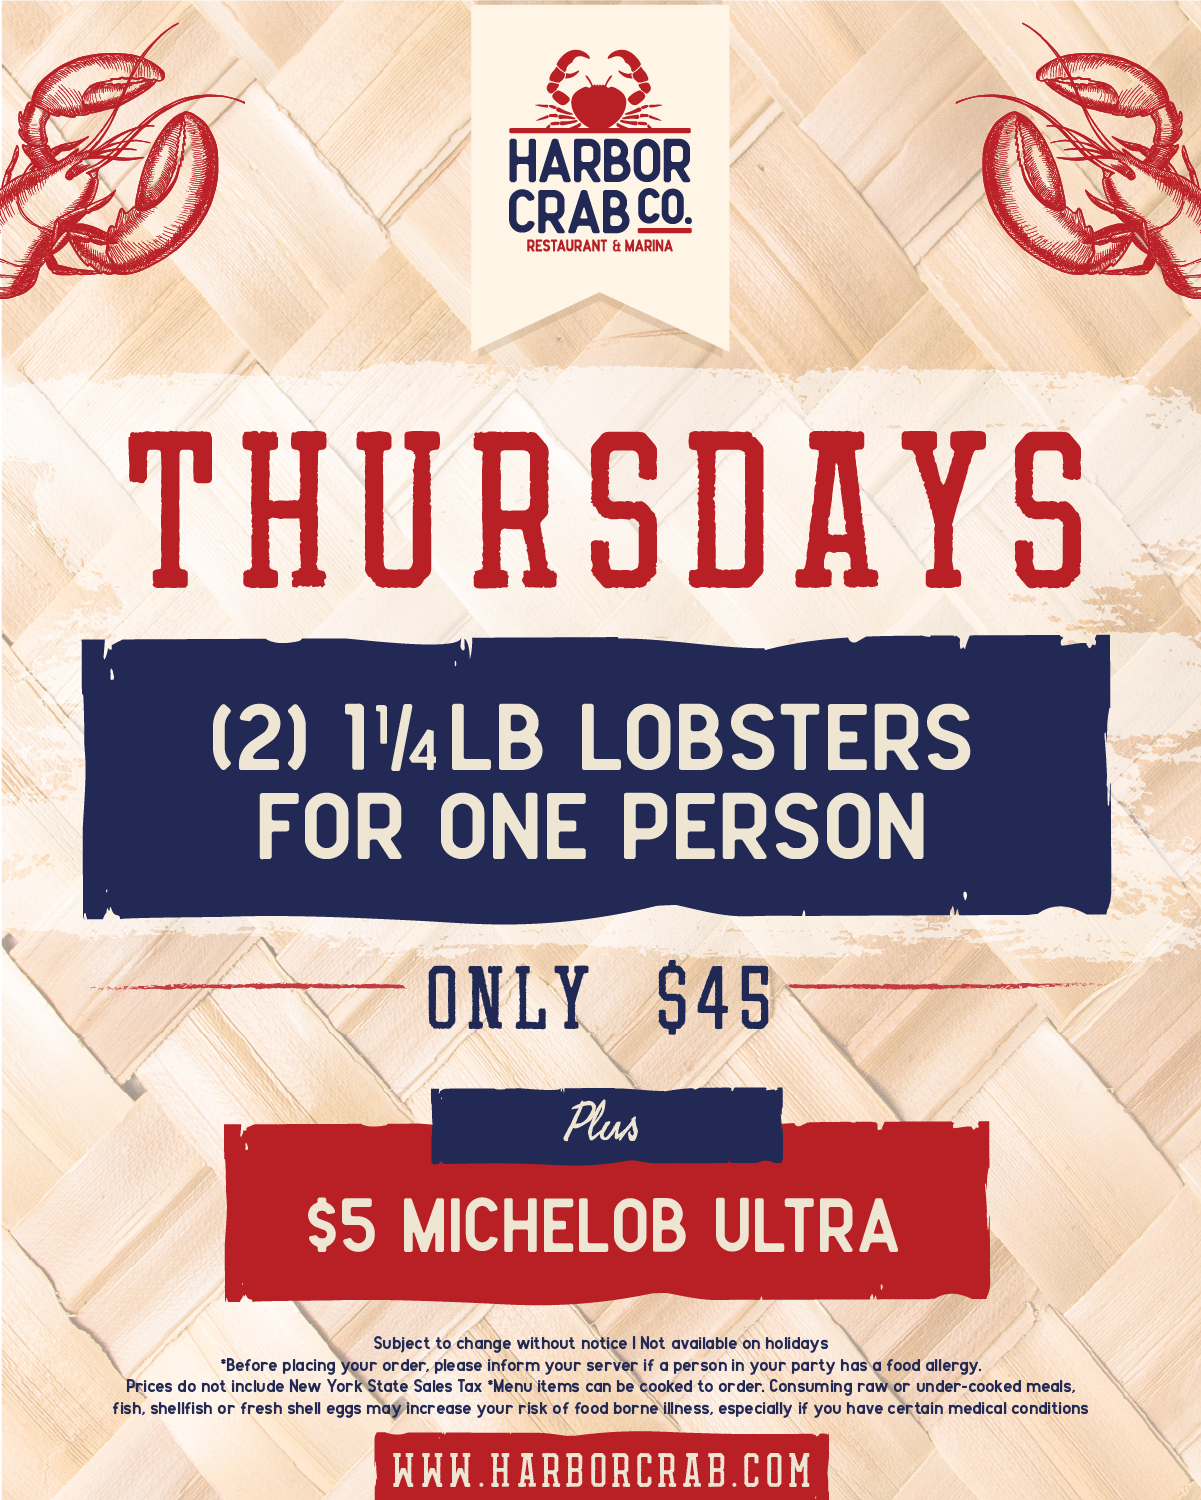 Thursday: 2 for 1 Lobsters